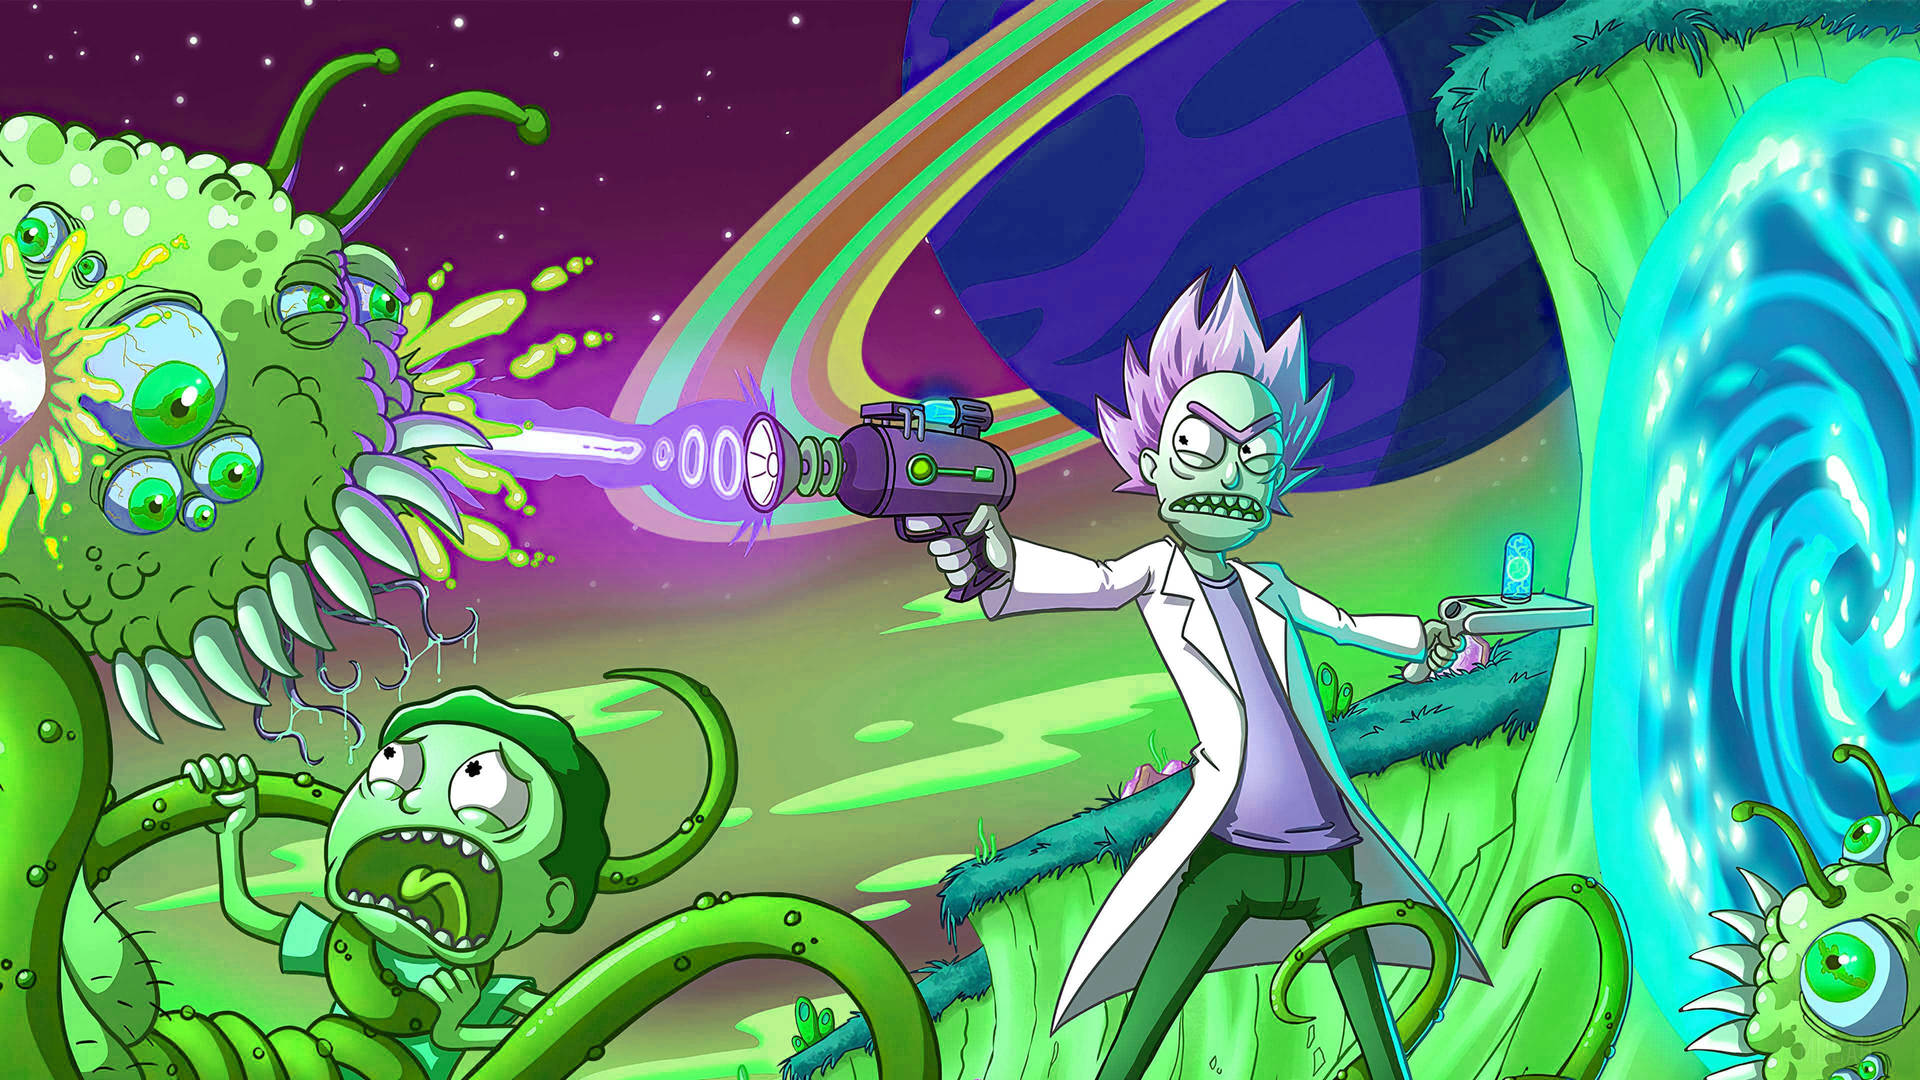 Get Stuck Down the Rabbit Hole with Rick and Morty Wallpaper